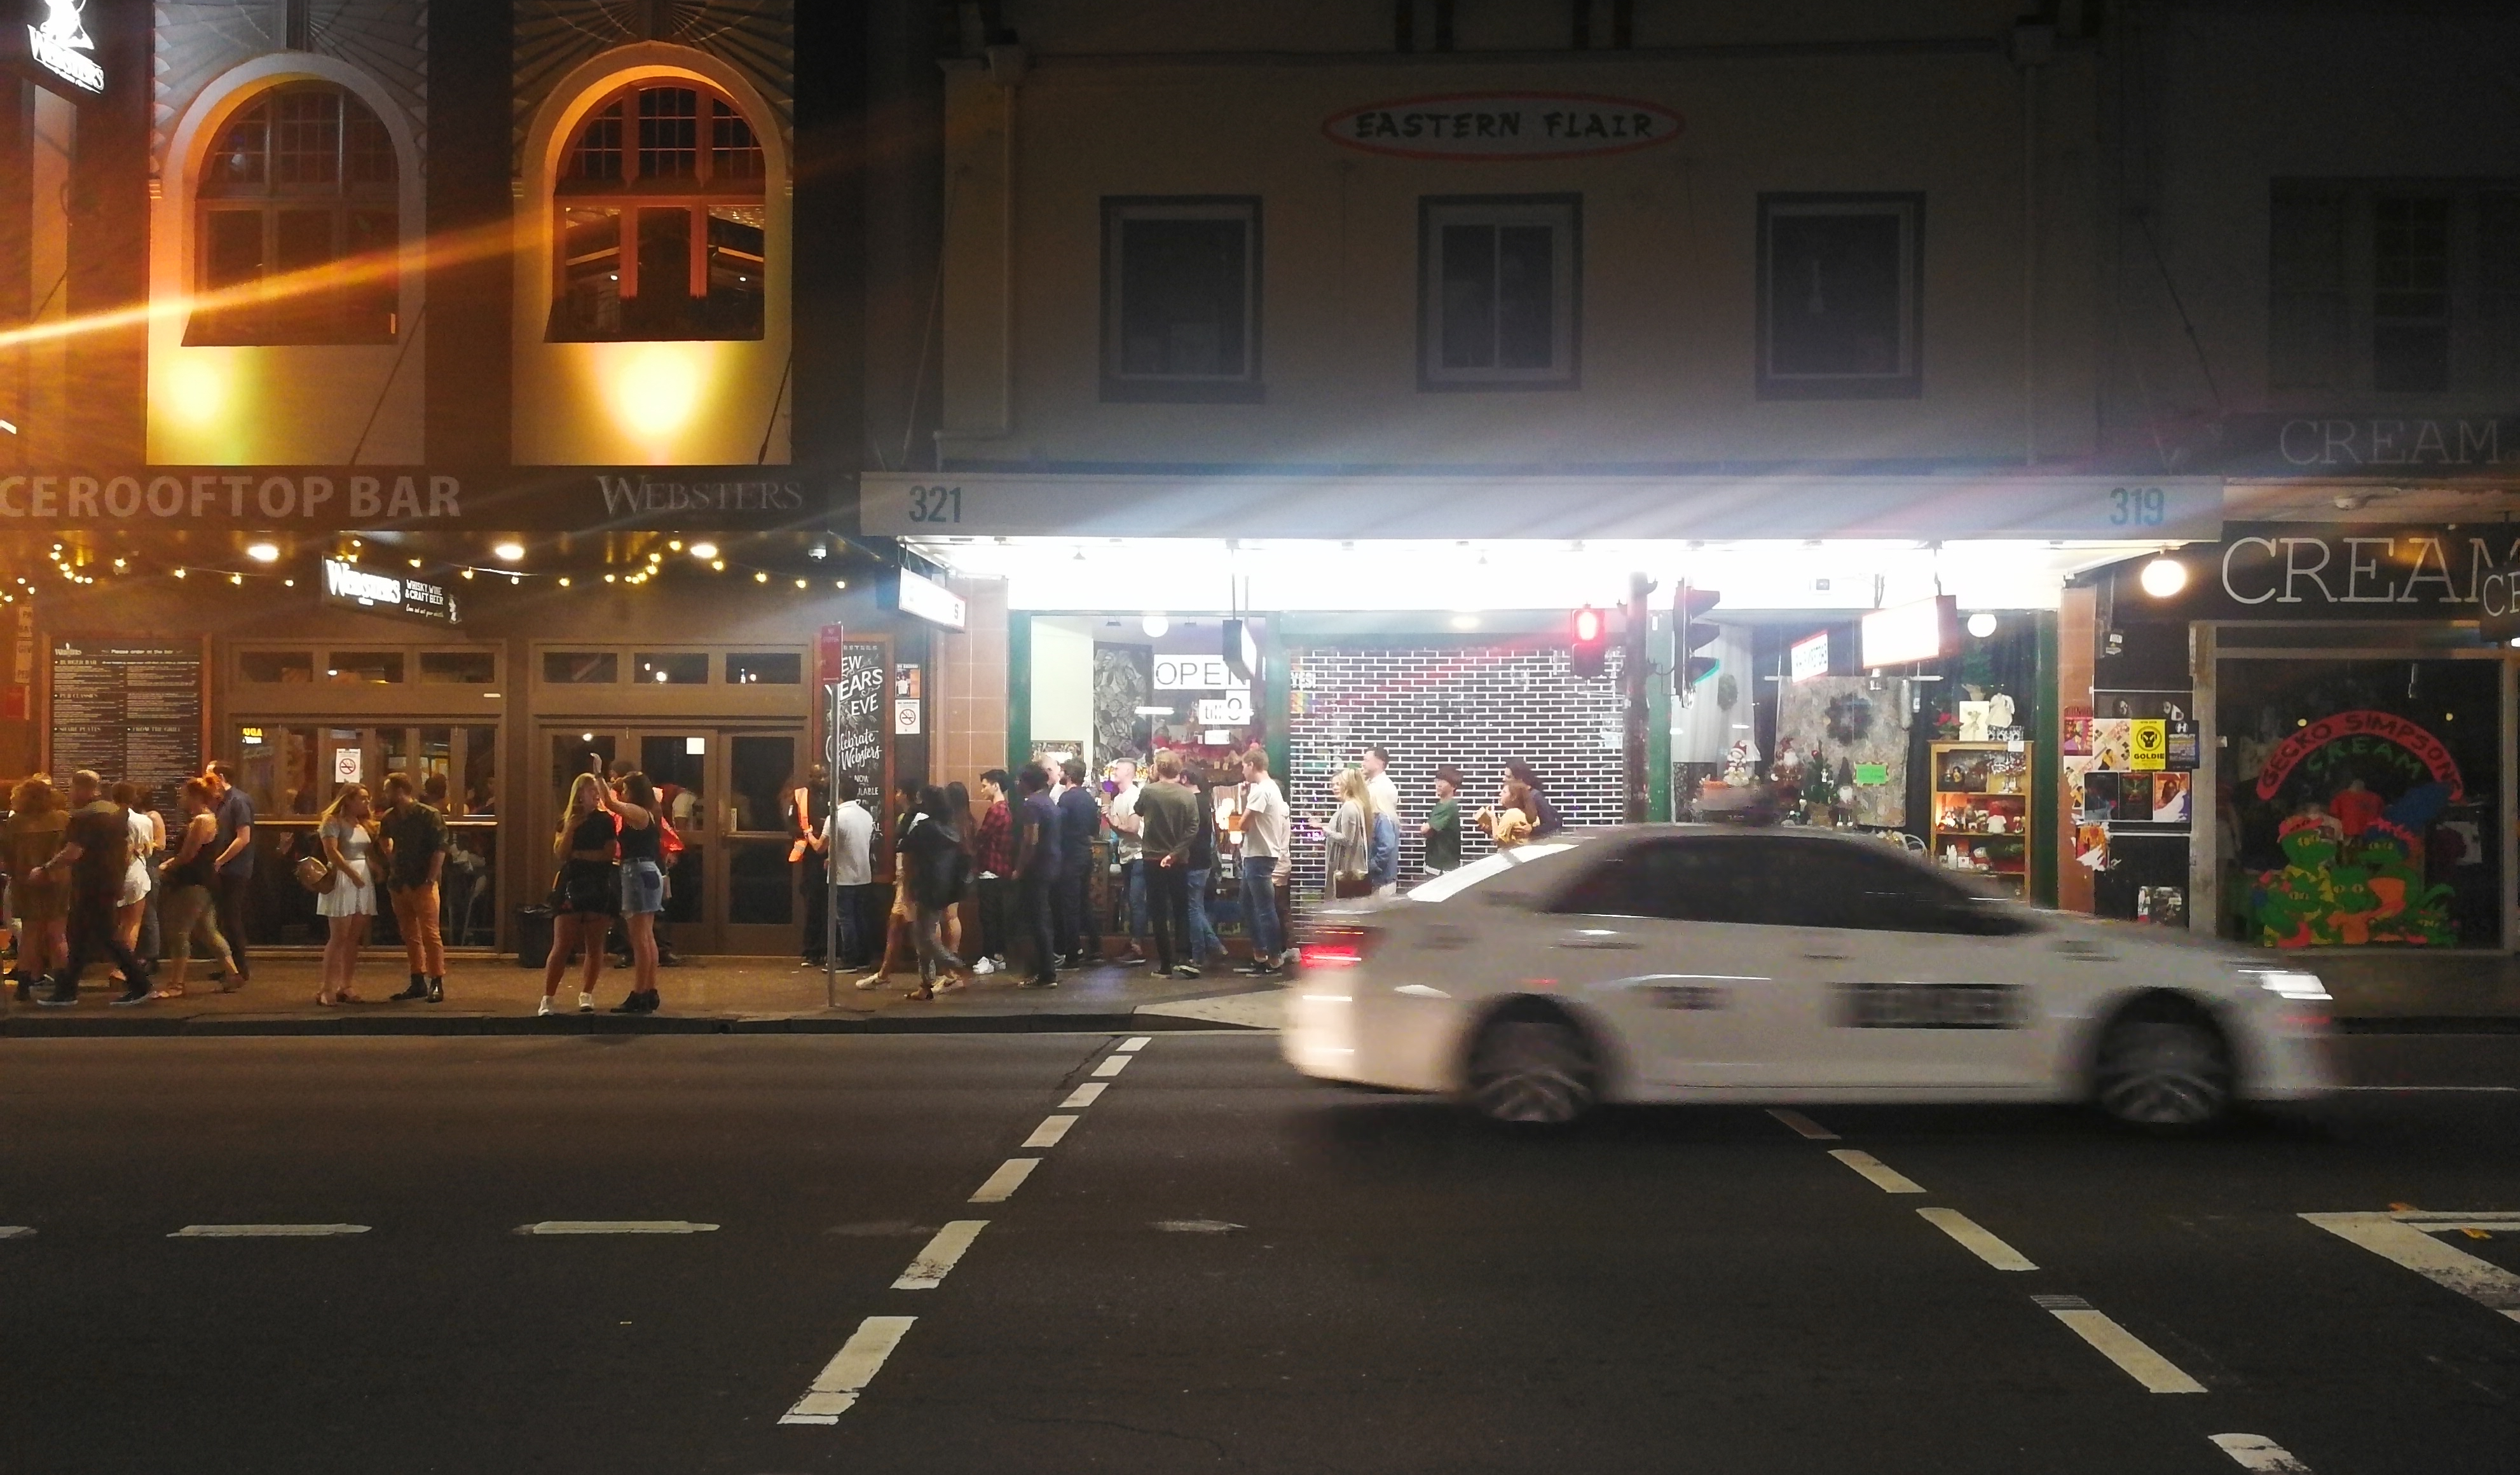 A line accumulates outside Webster's Bar in Newtown. Image: Christopher Kelly